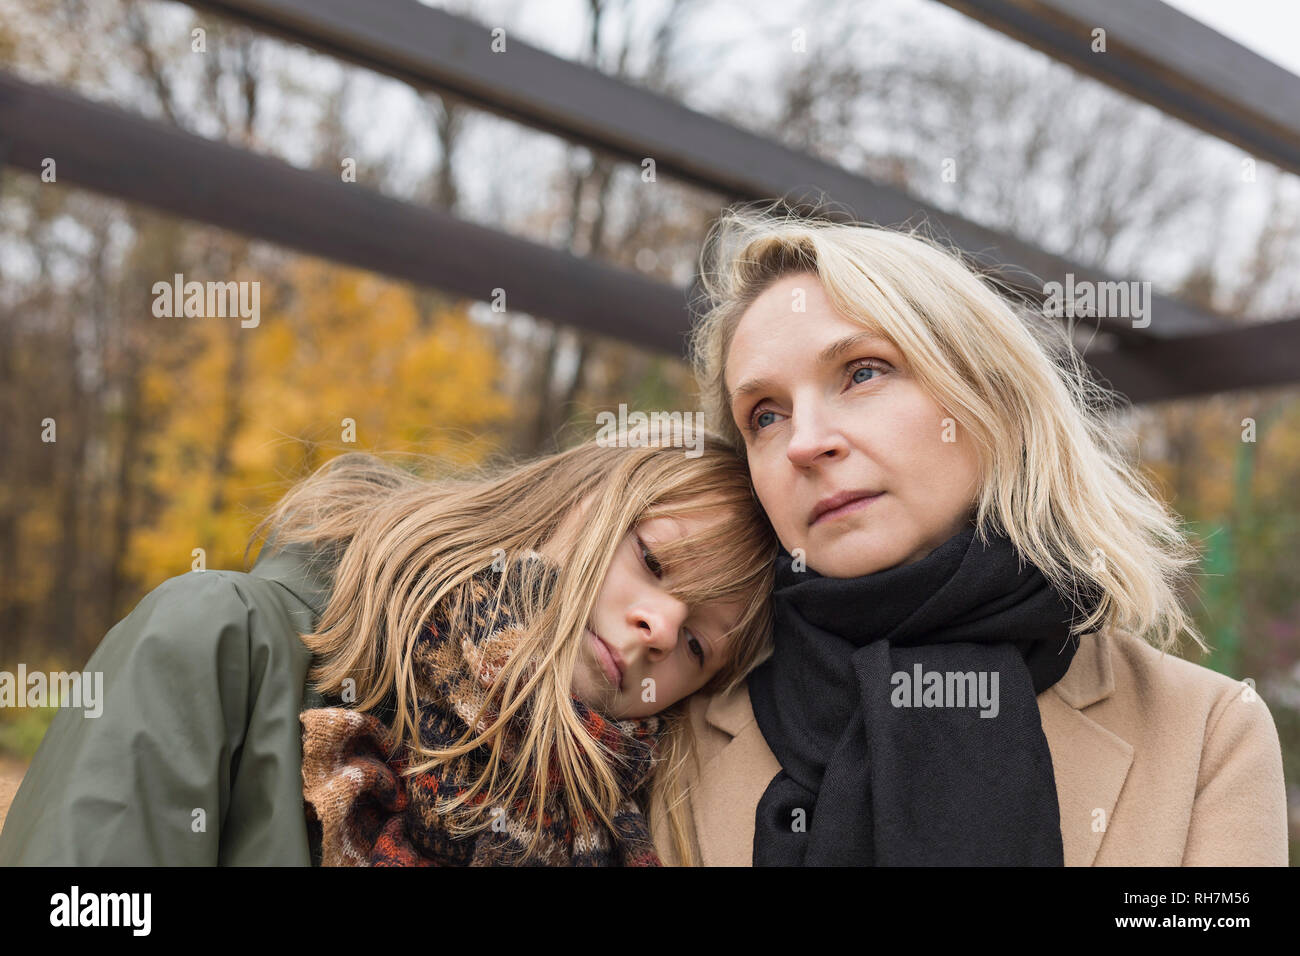 Affectionate, serene mother and daughter in autumn park Stock Photo